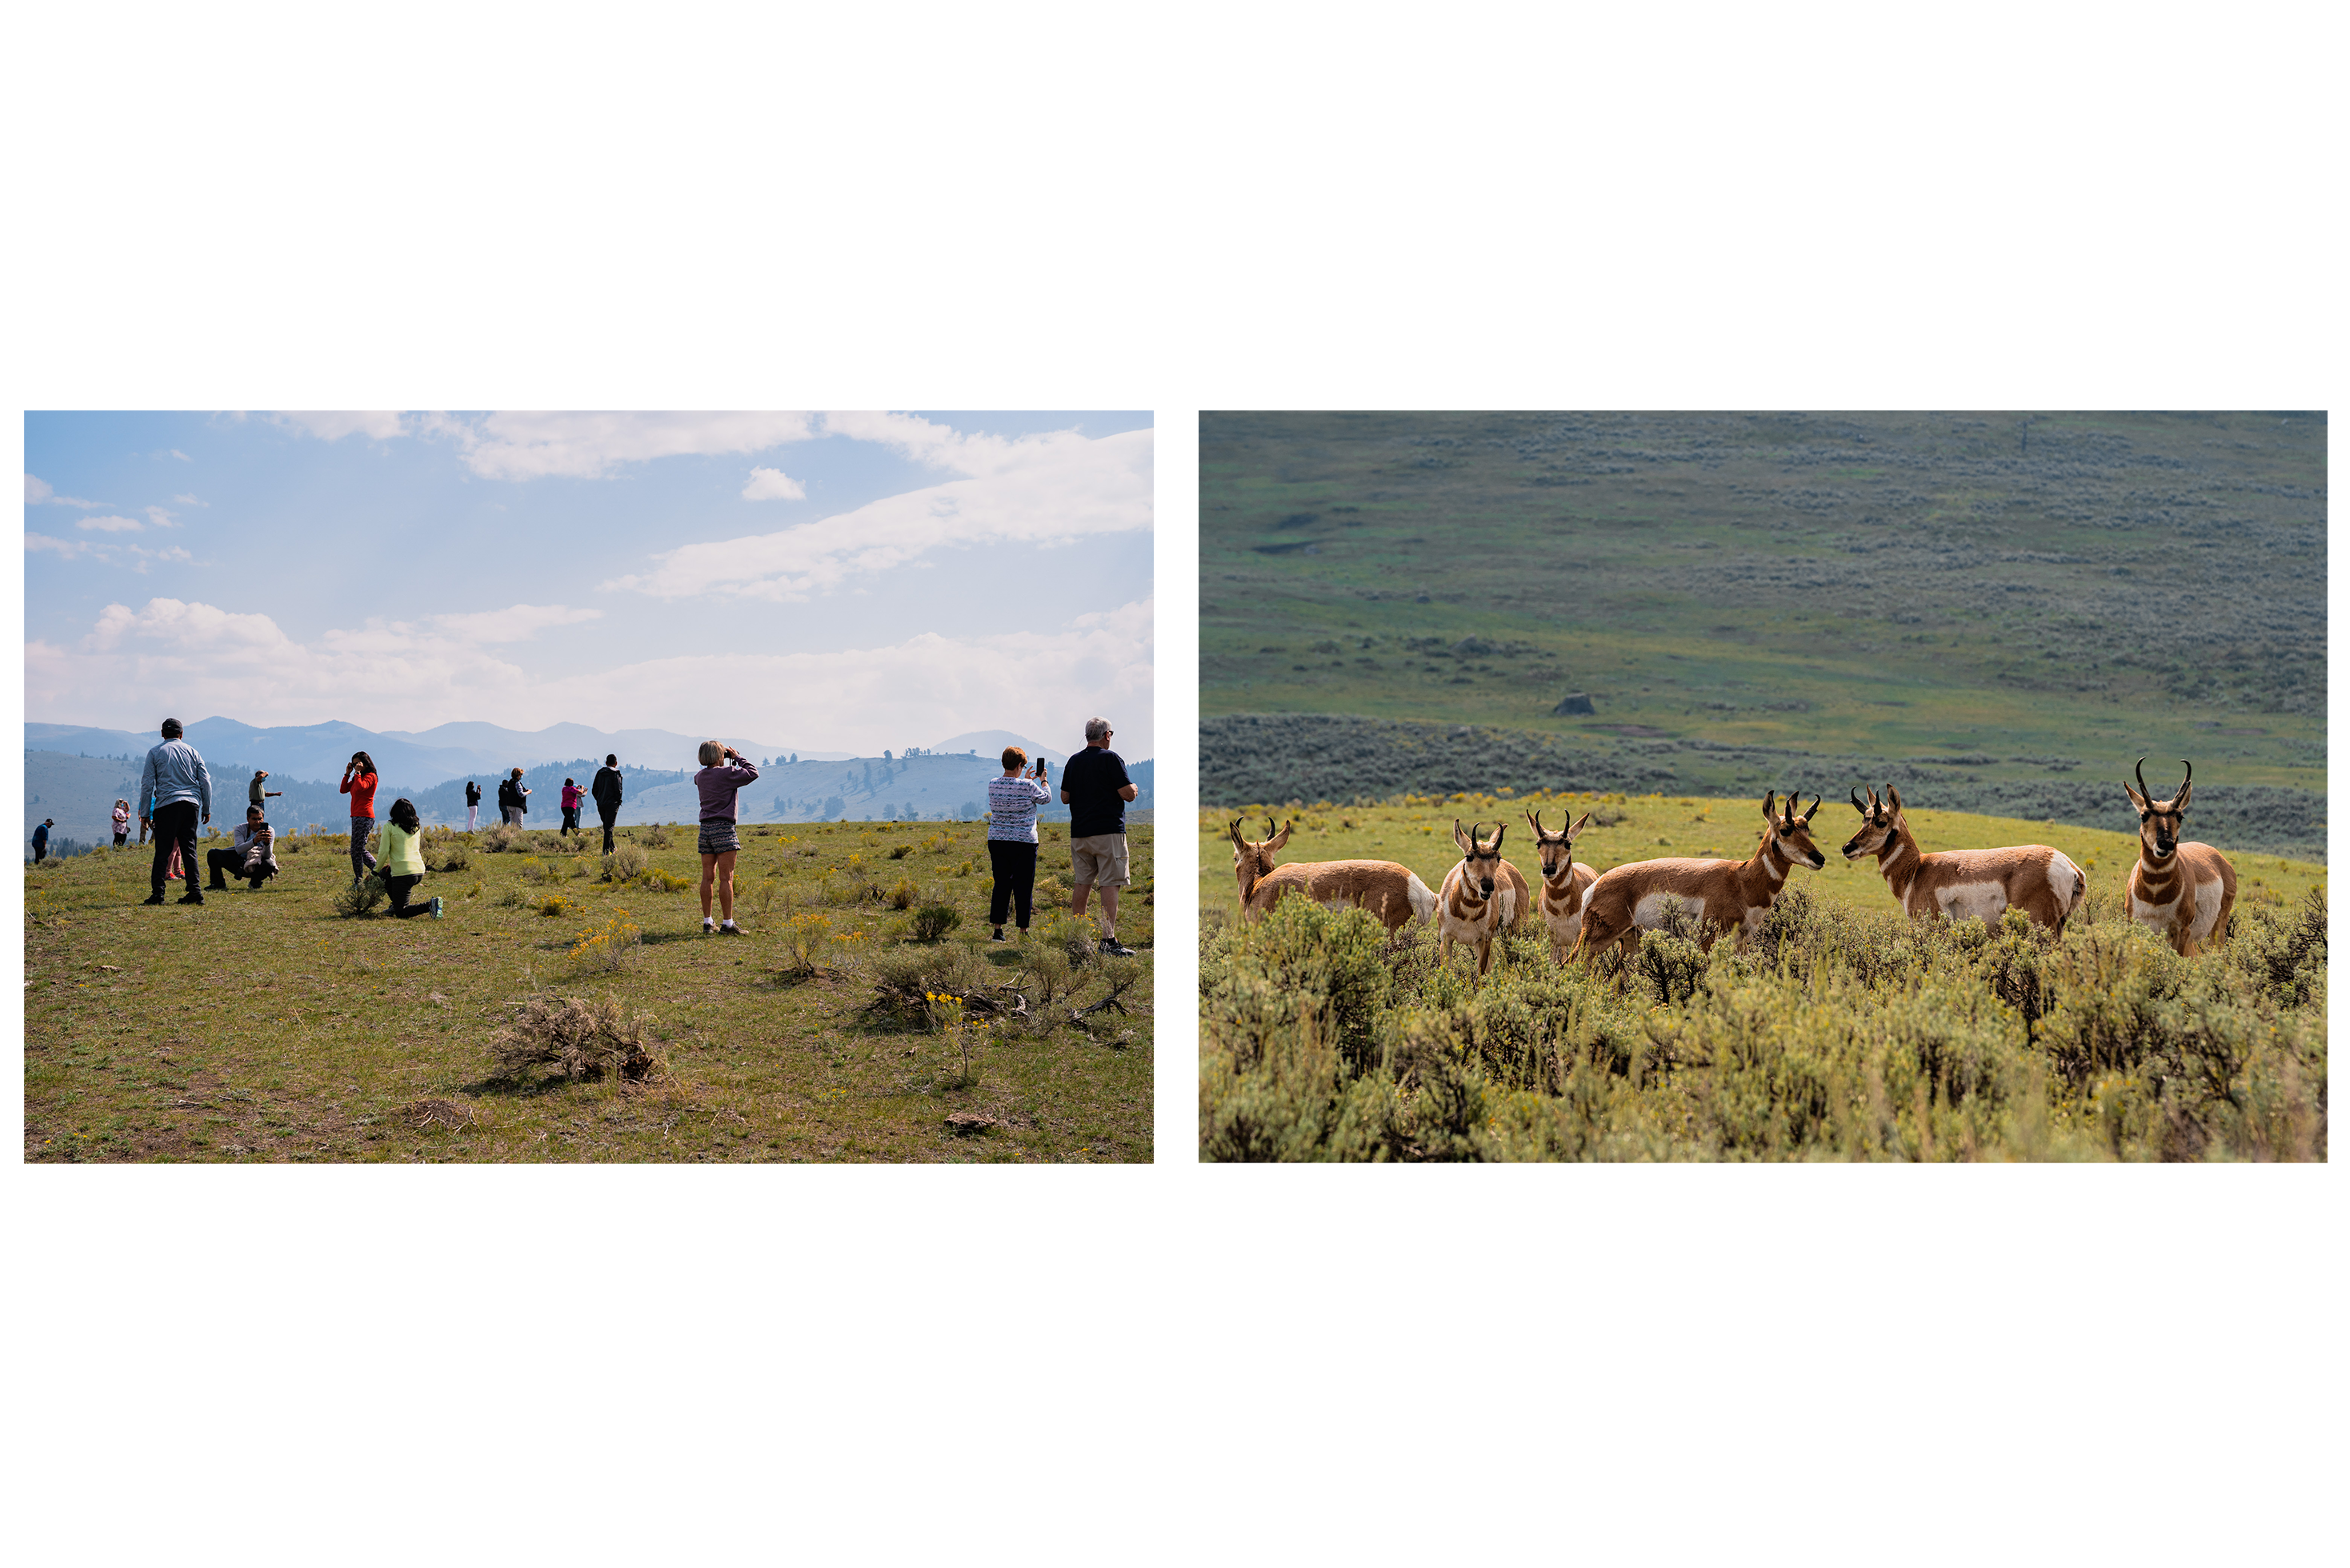 Bison, elk and social distance: A photographer’s view from Yellowstone during delta - Pronghorn are found mainly in the Northern section of...